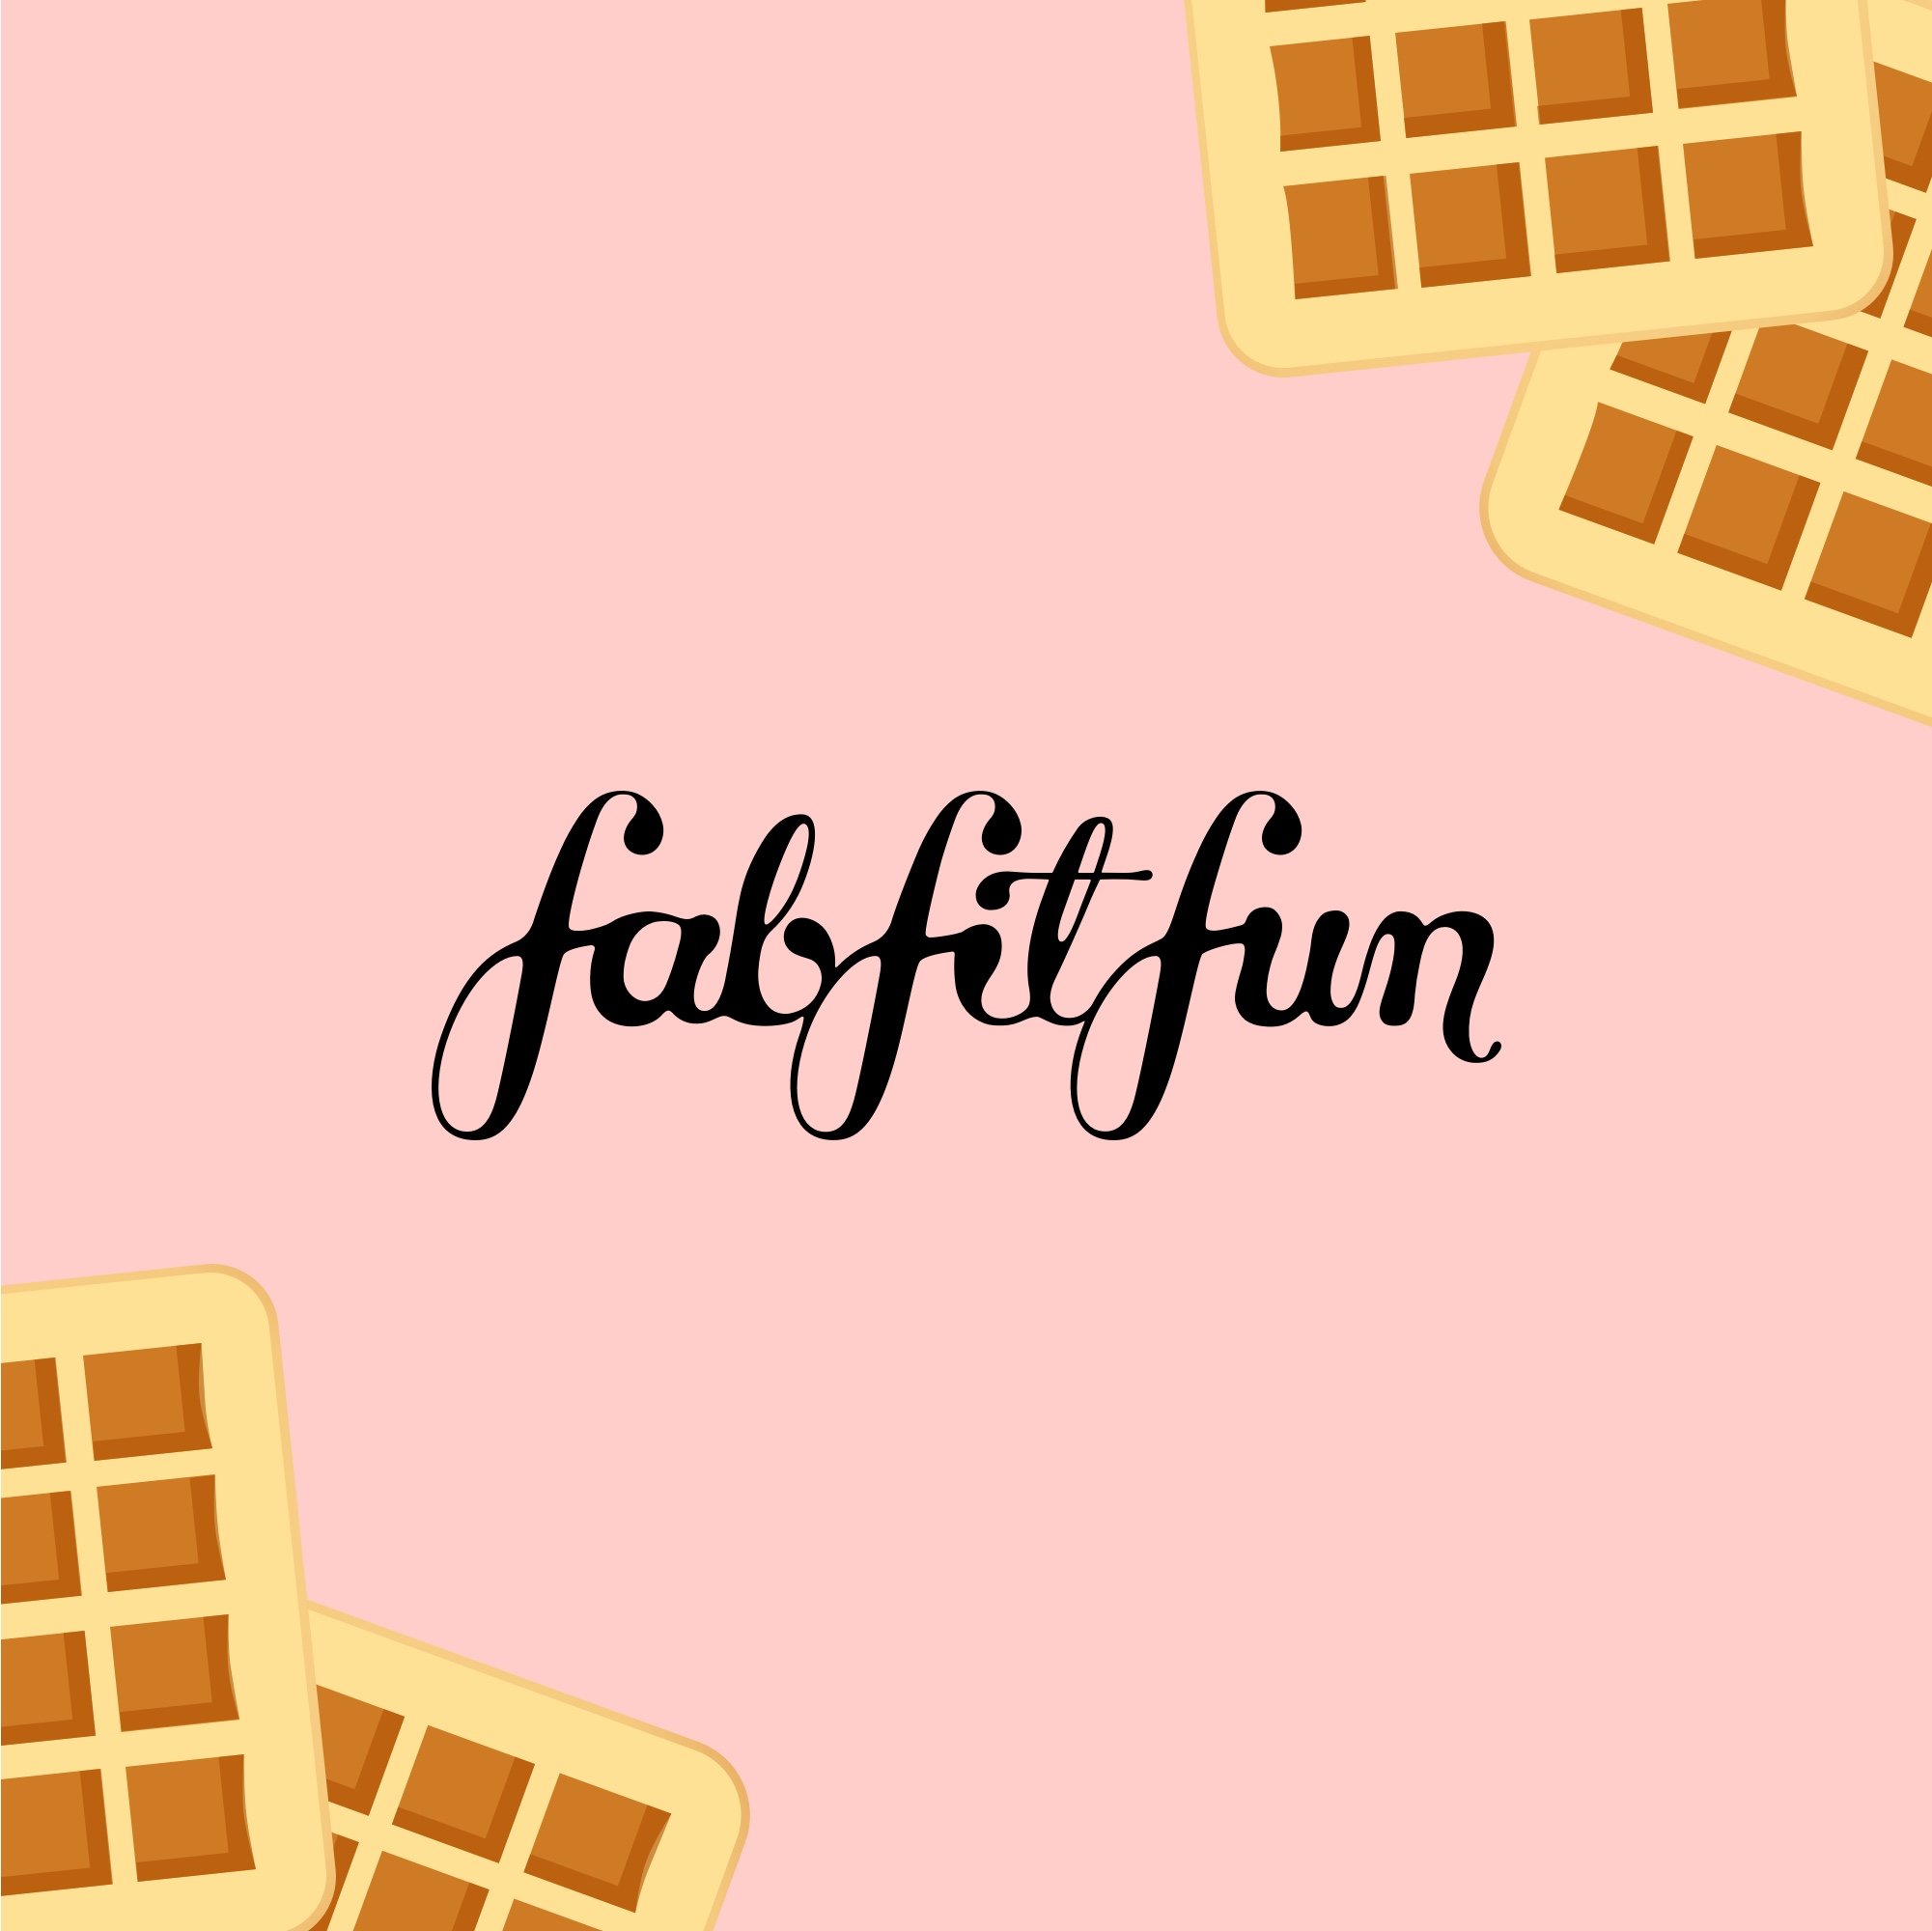 Galentine’s Day Giveaway – Win a $100 FabFitFun Gift Card You & Your Bestie!